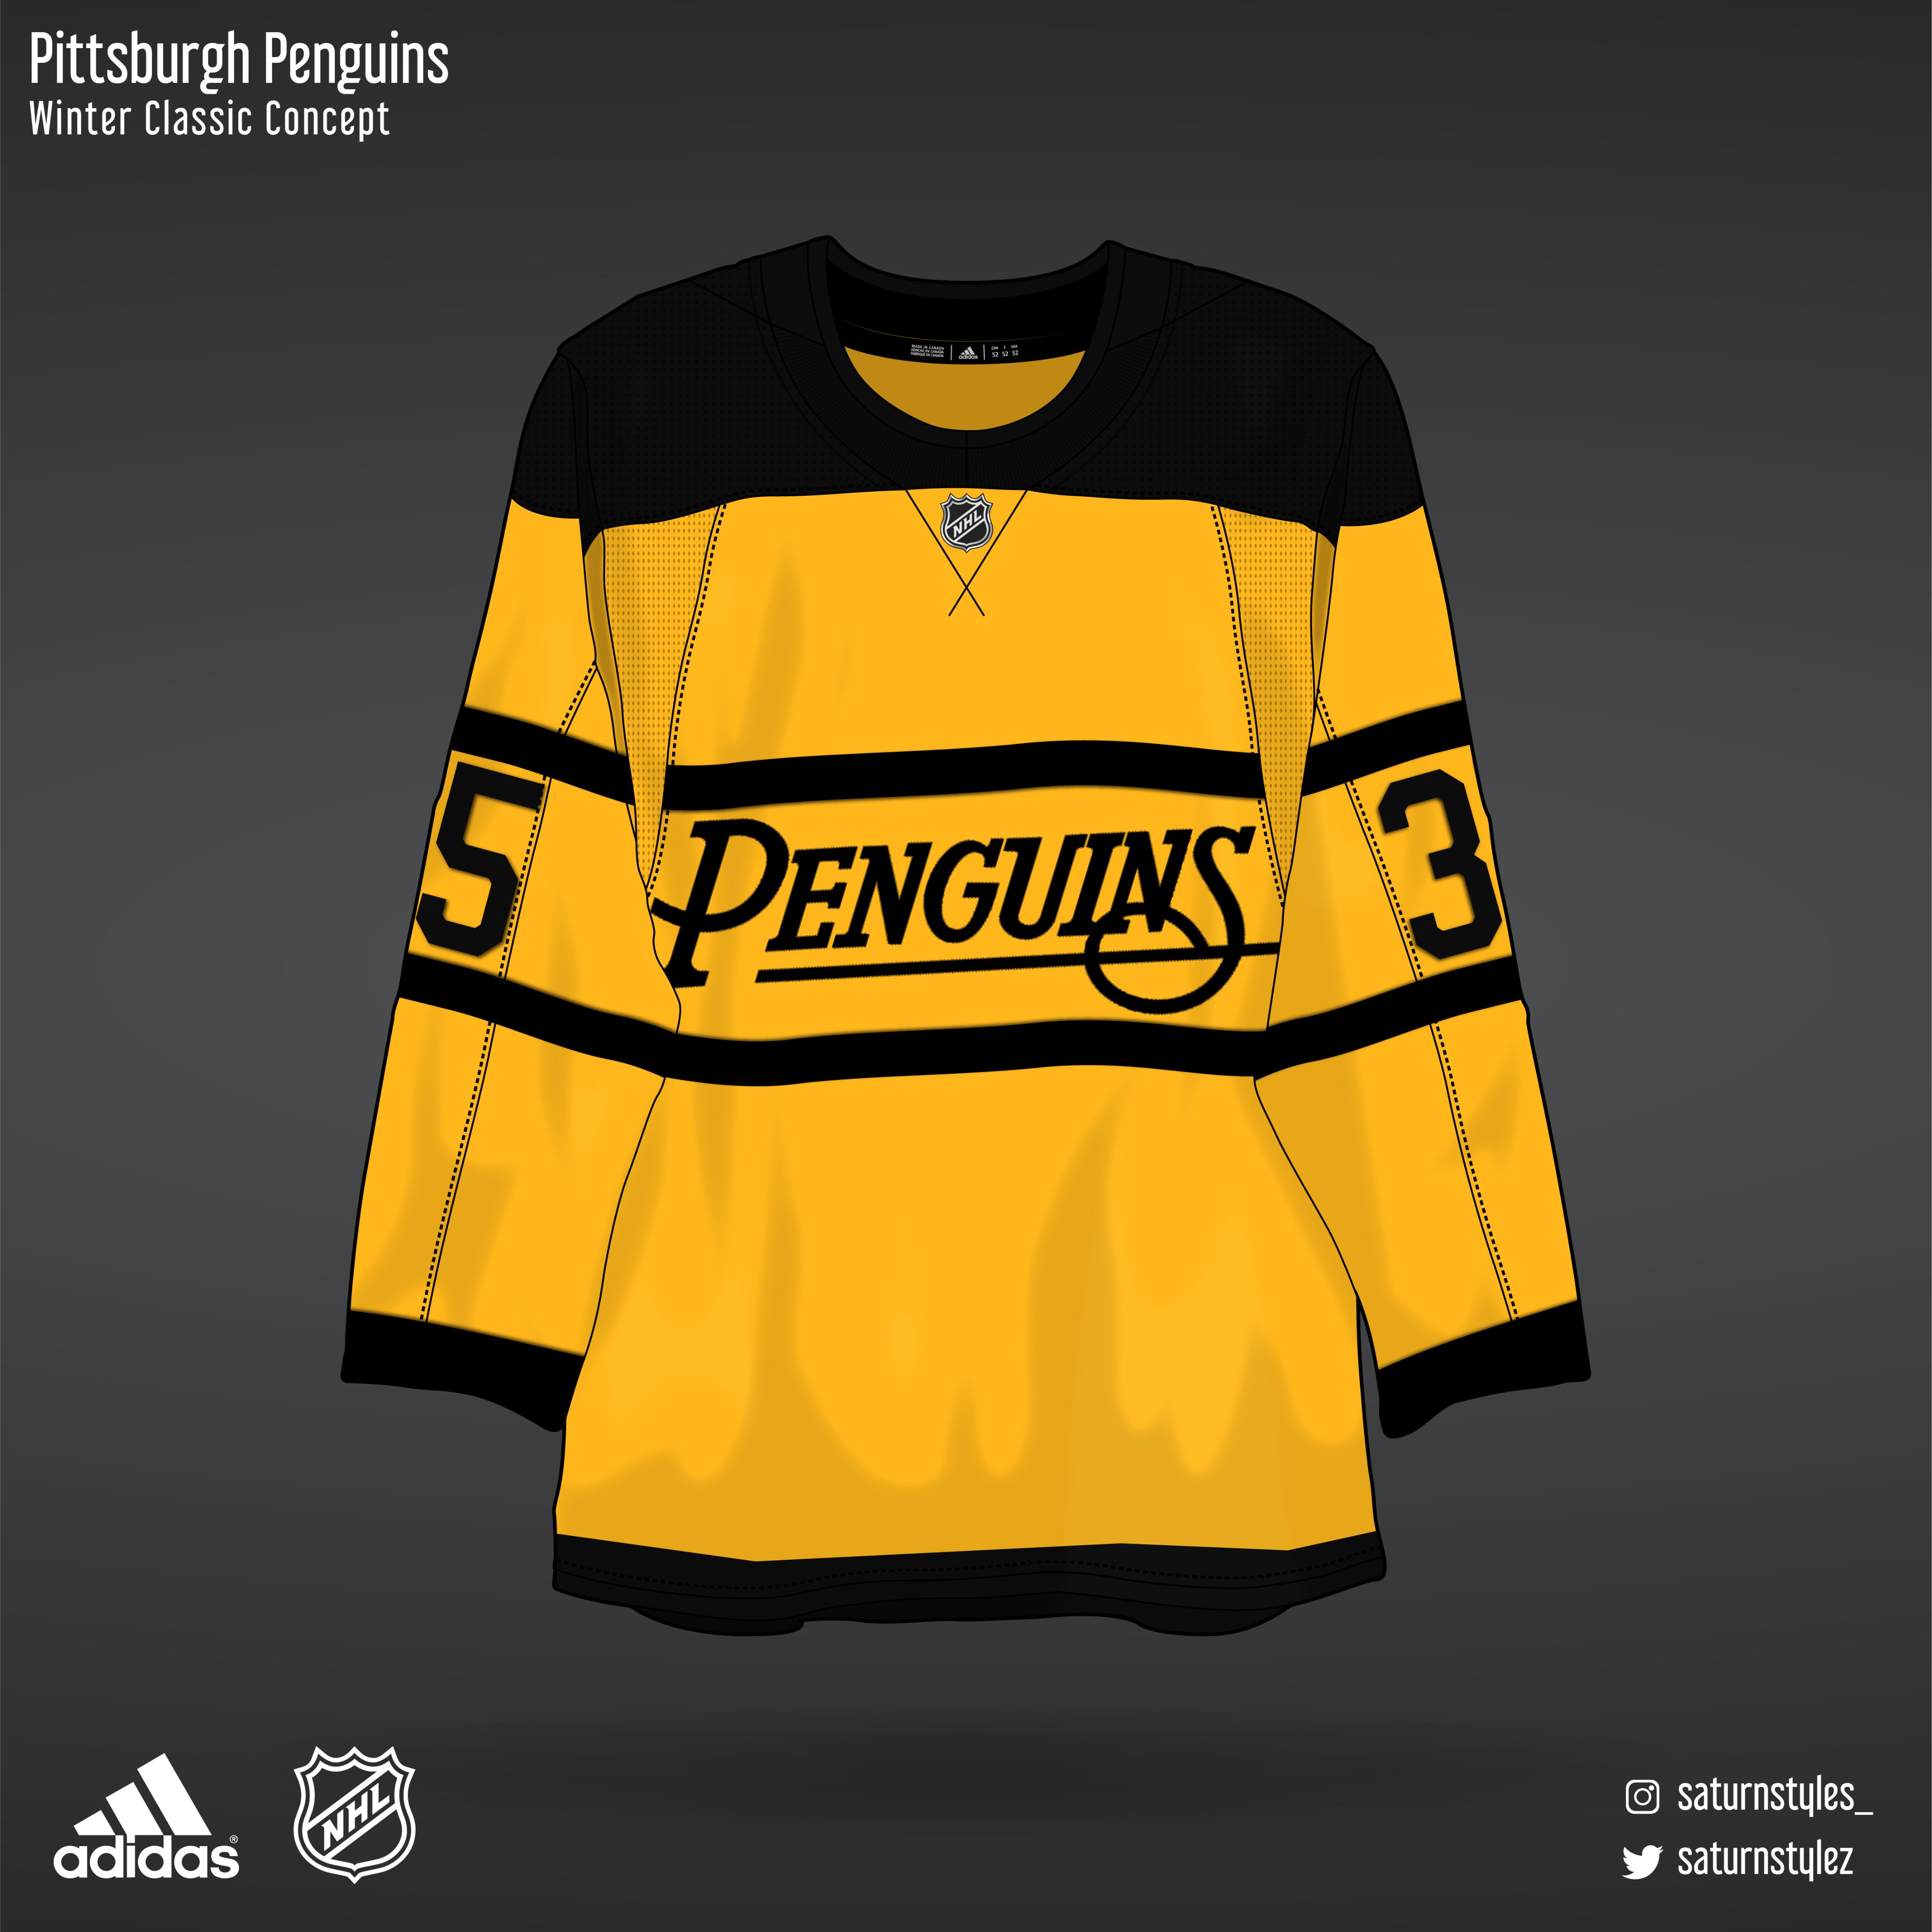 Saturn Styles on X: Pittsburgh Penguins Winter Classic jersey